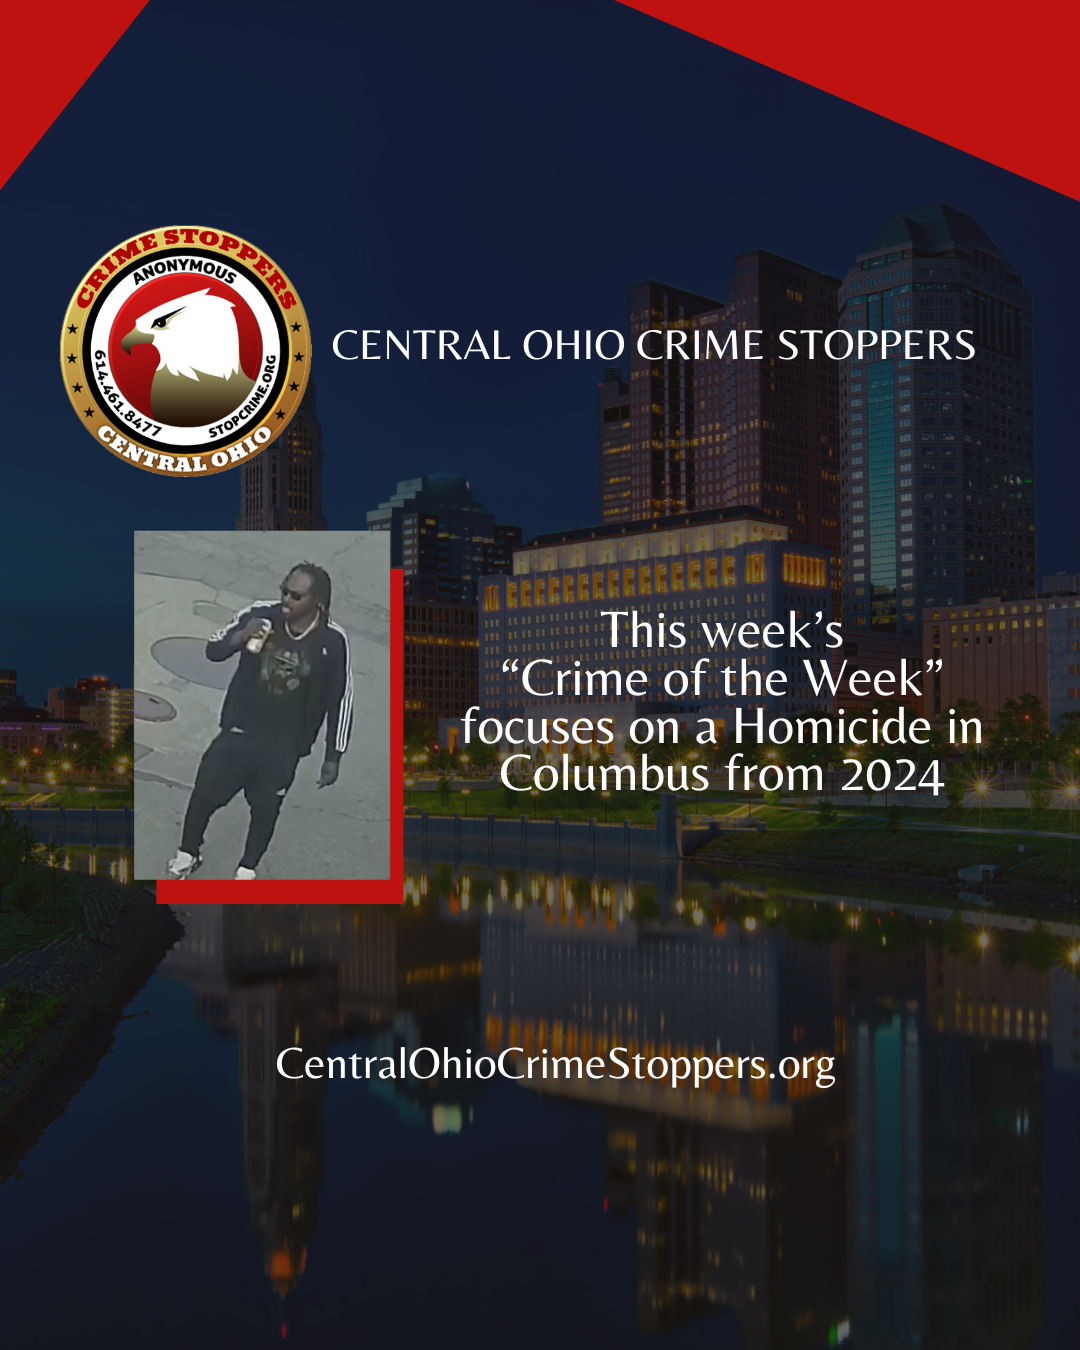 This week’s “Crime of the Week” focuses on a Homicide in Columbus from 2024.